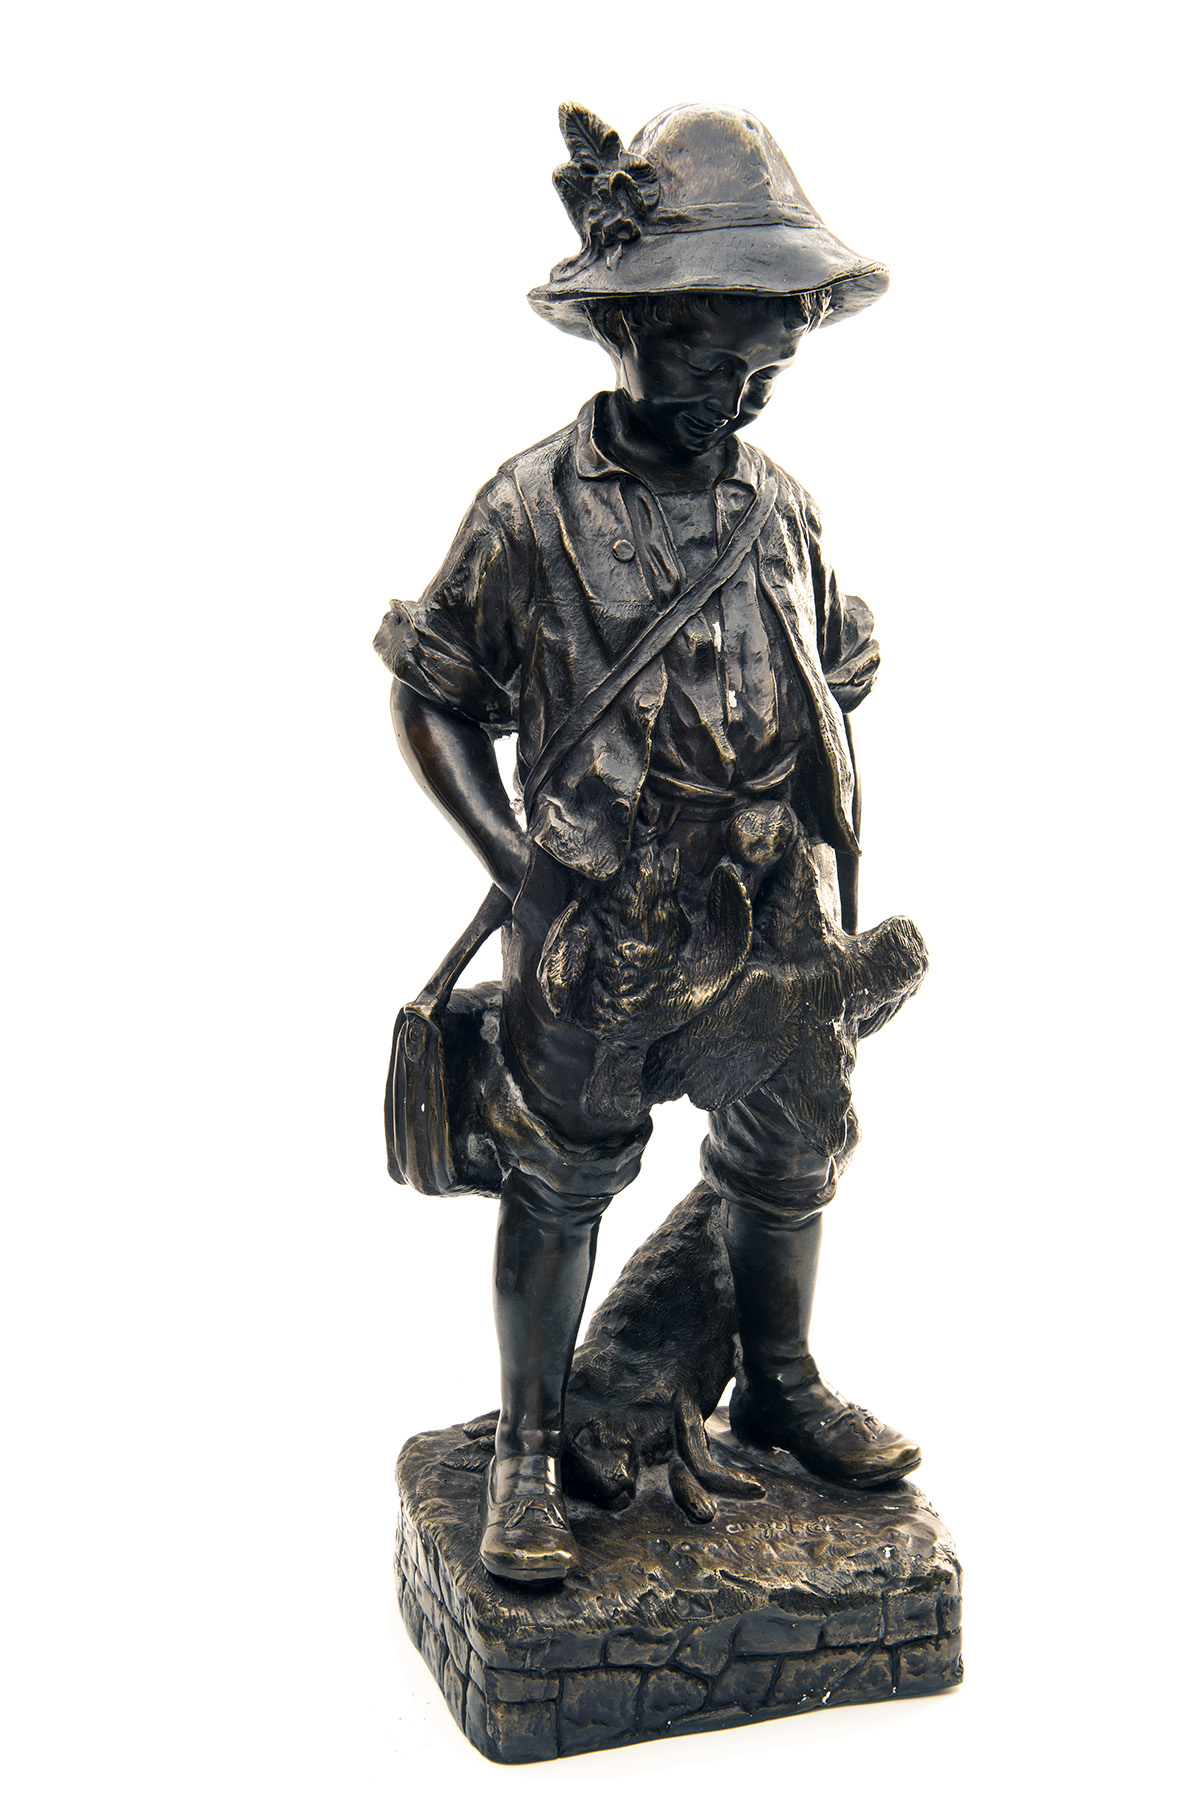 A BRONZE OF A SMALL BAVARIAN BOY RETURNING FROM A HUNT, standing approx. 21in. tall, with his game